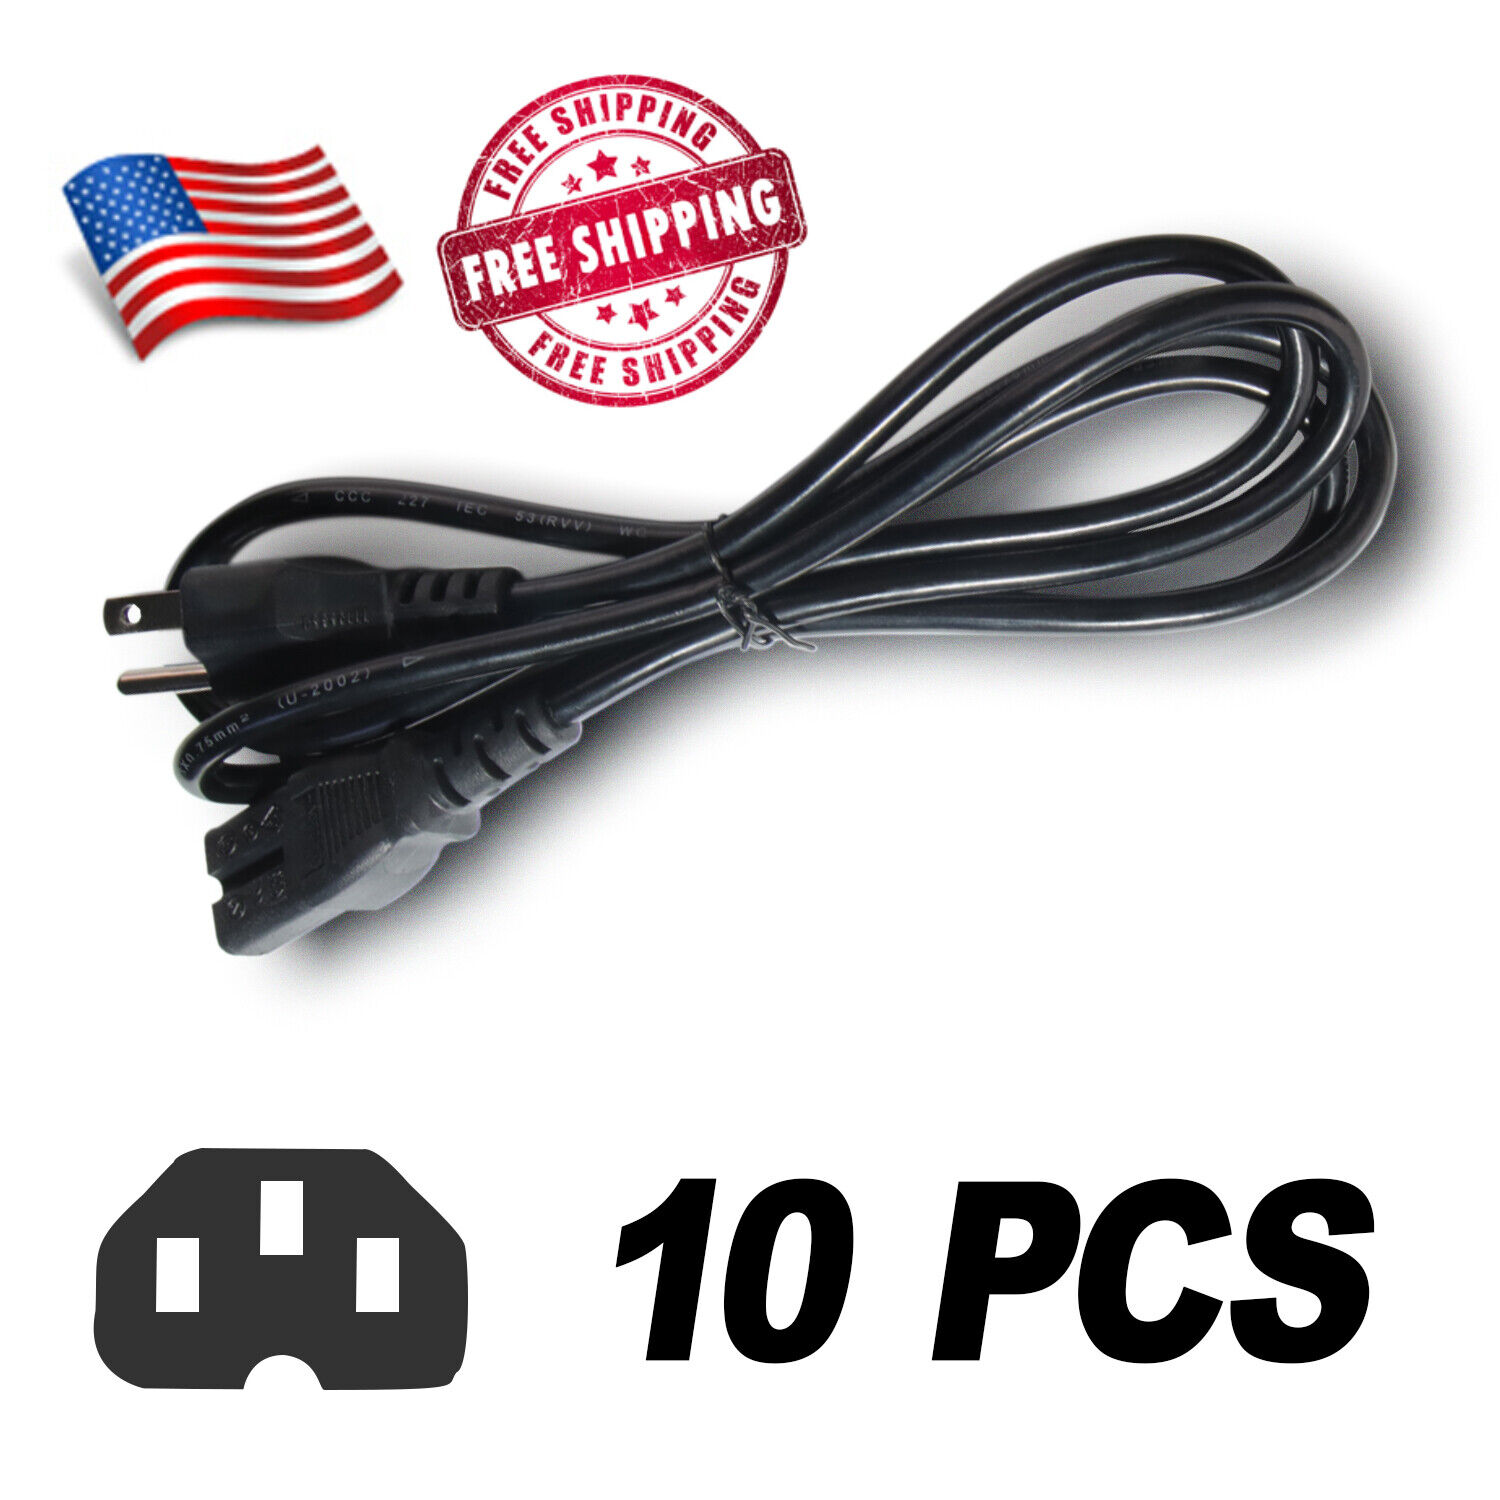 Lot of 100  6ft Standard AC Male Power Cord Cable Monitor Computer PC 3-Prong